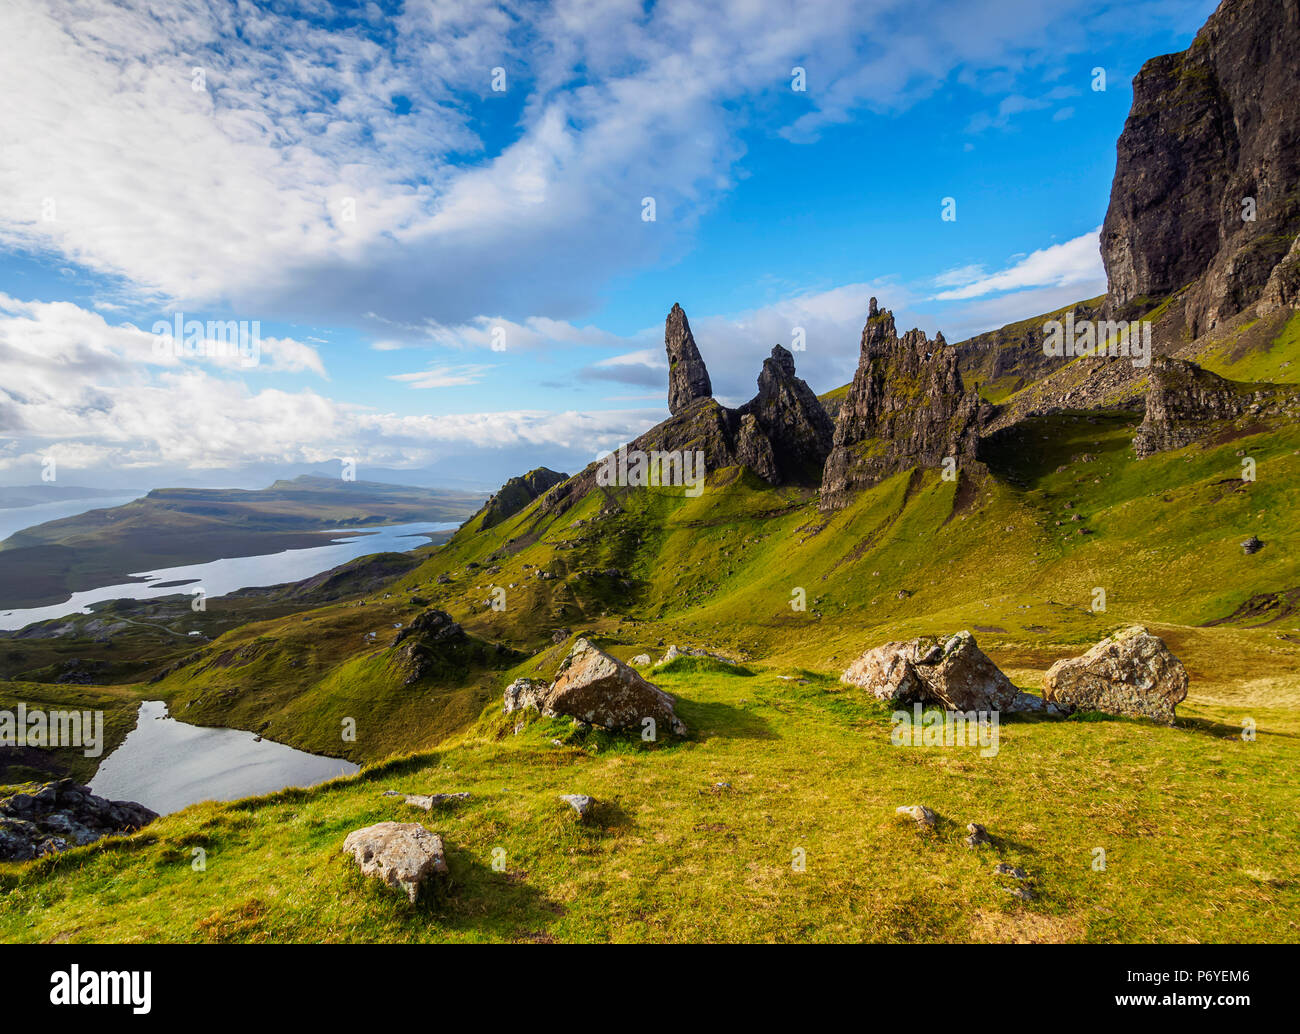 UK, Scotland, Highlands, Isle of Skye, View of the Old Man of Storr. Stock Photo